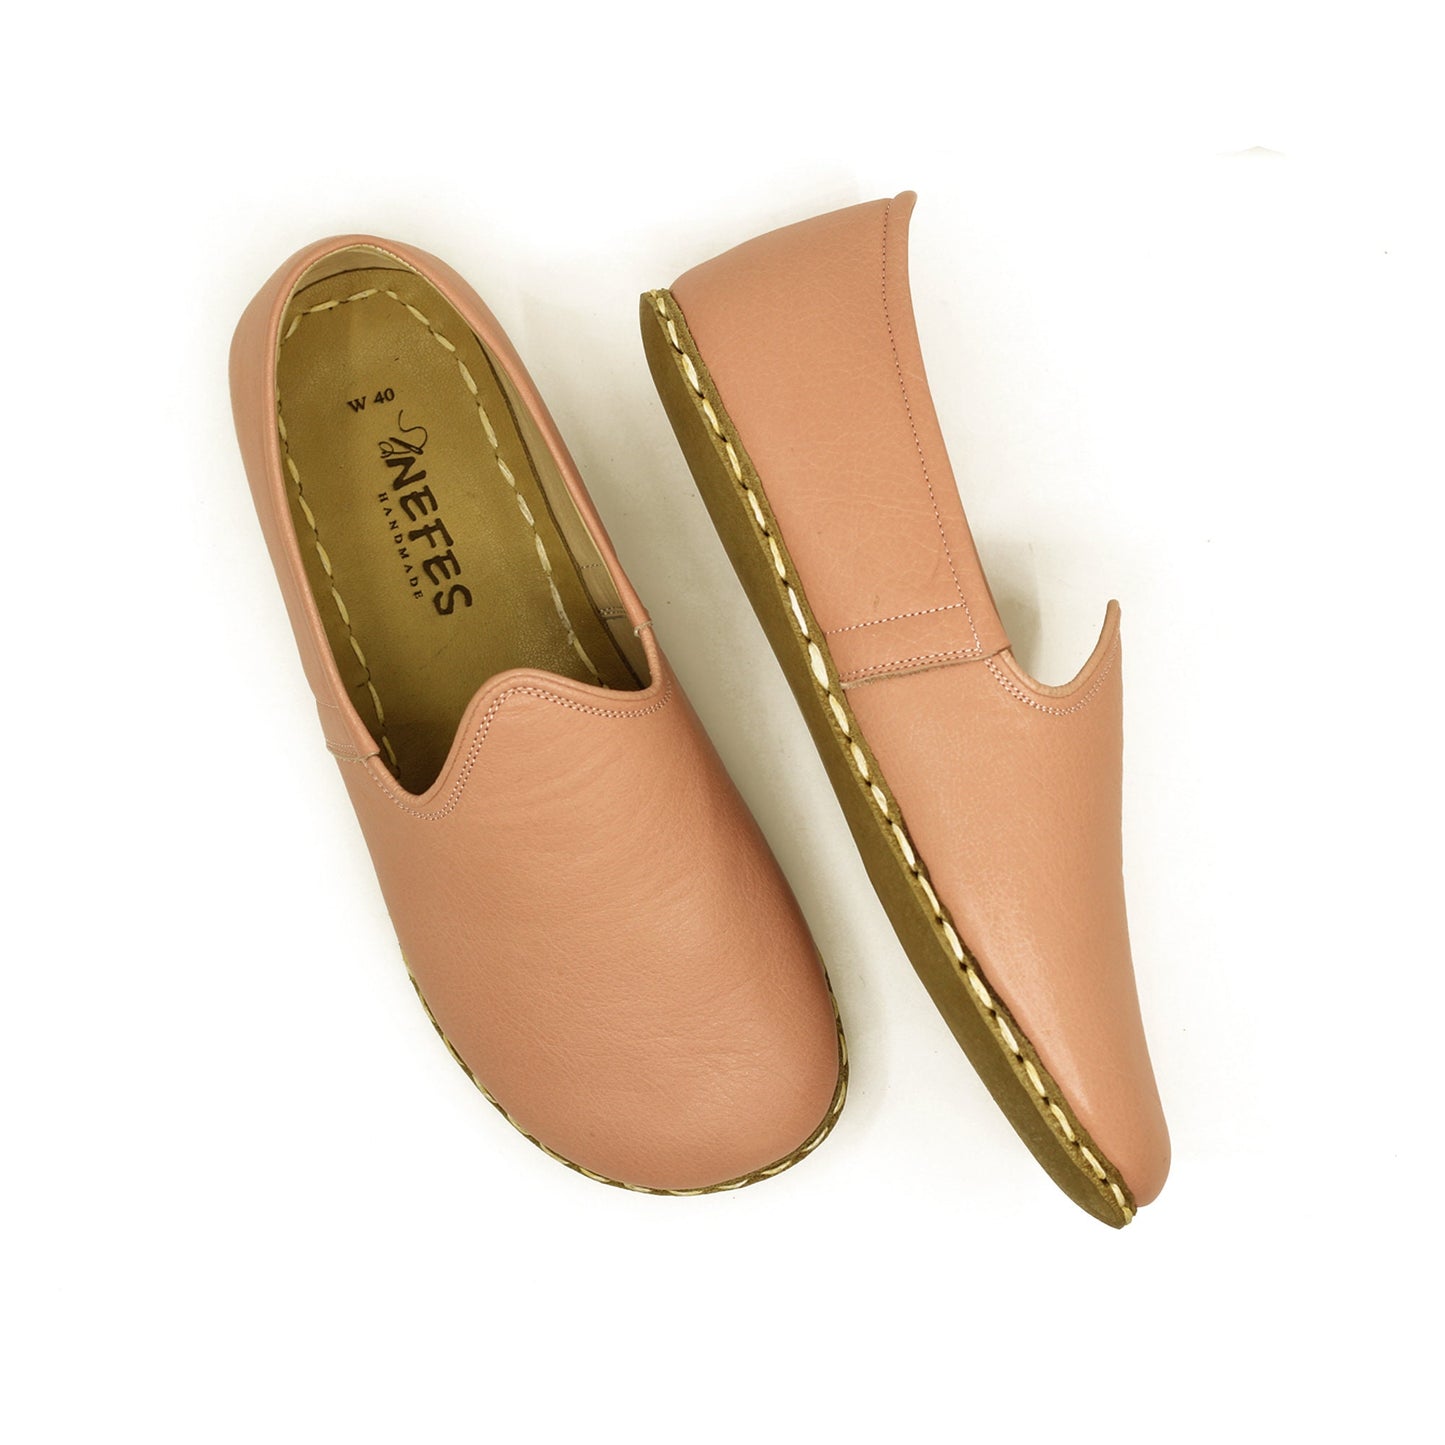 Light Pink Soft Leather Barefoot Shoes for Women with Wide Toe Design and Zero Drop